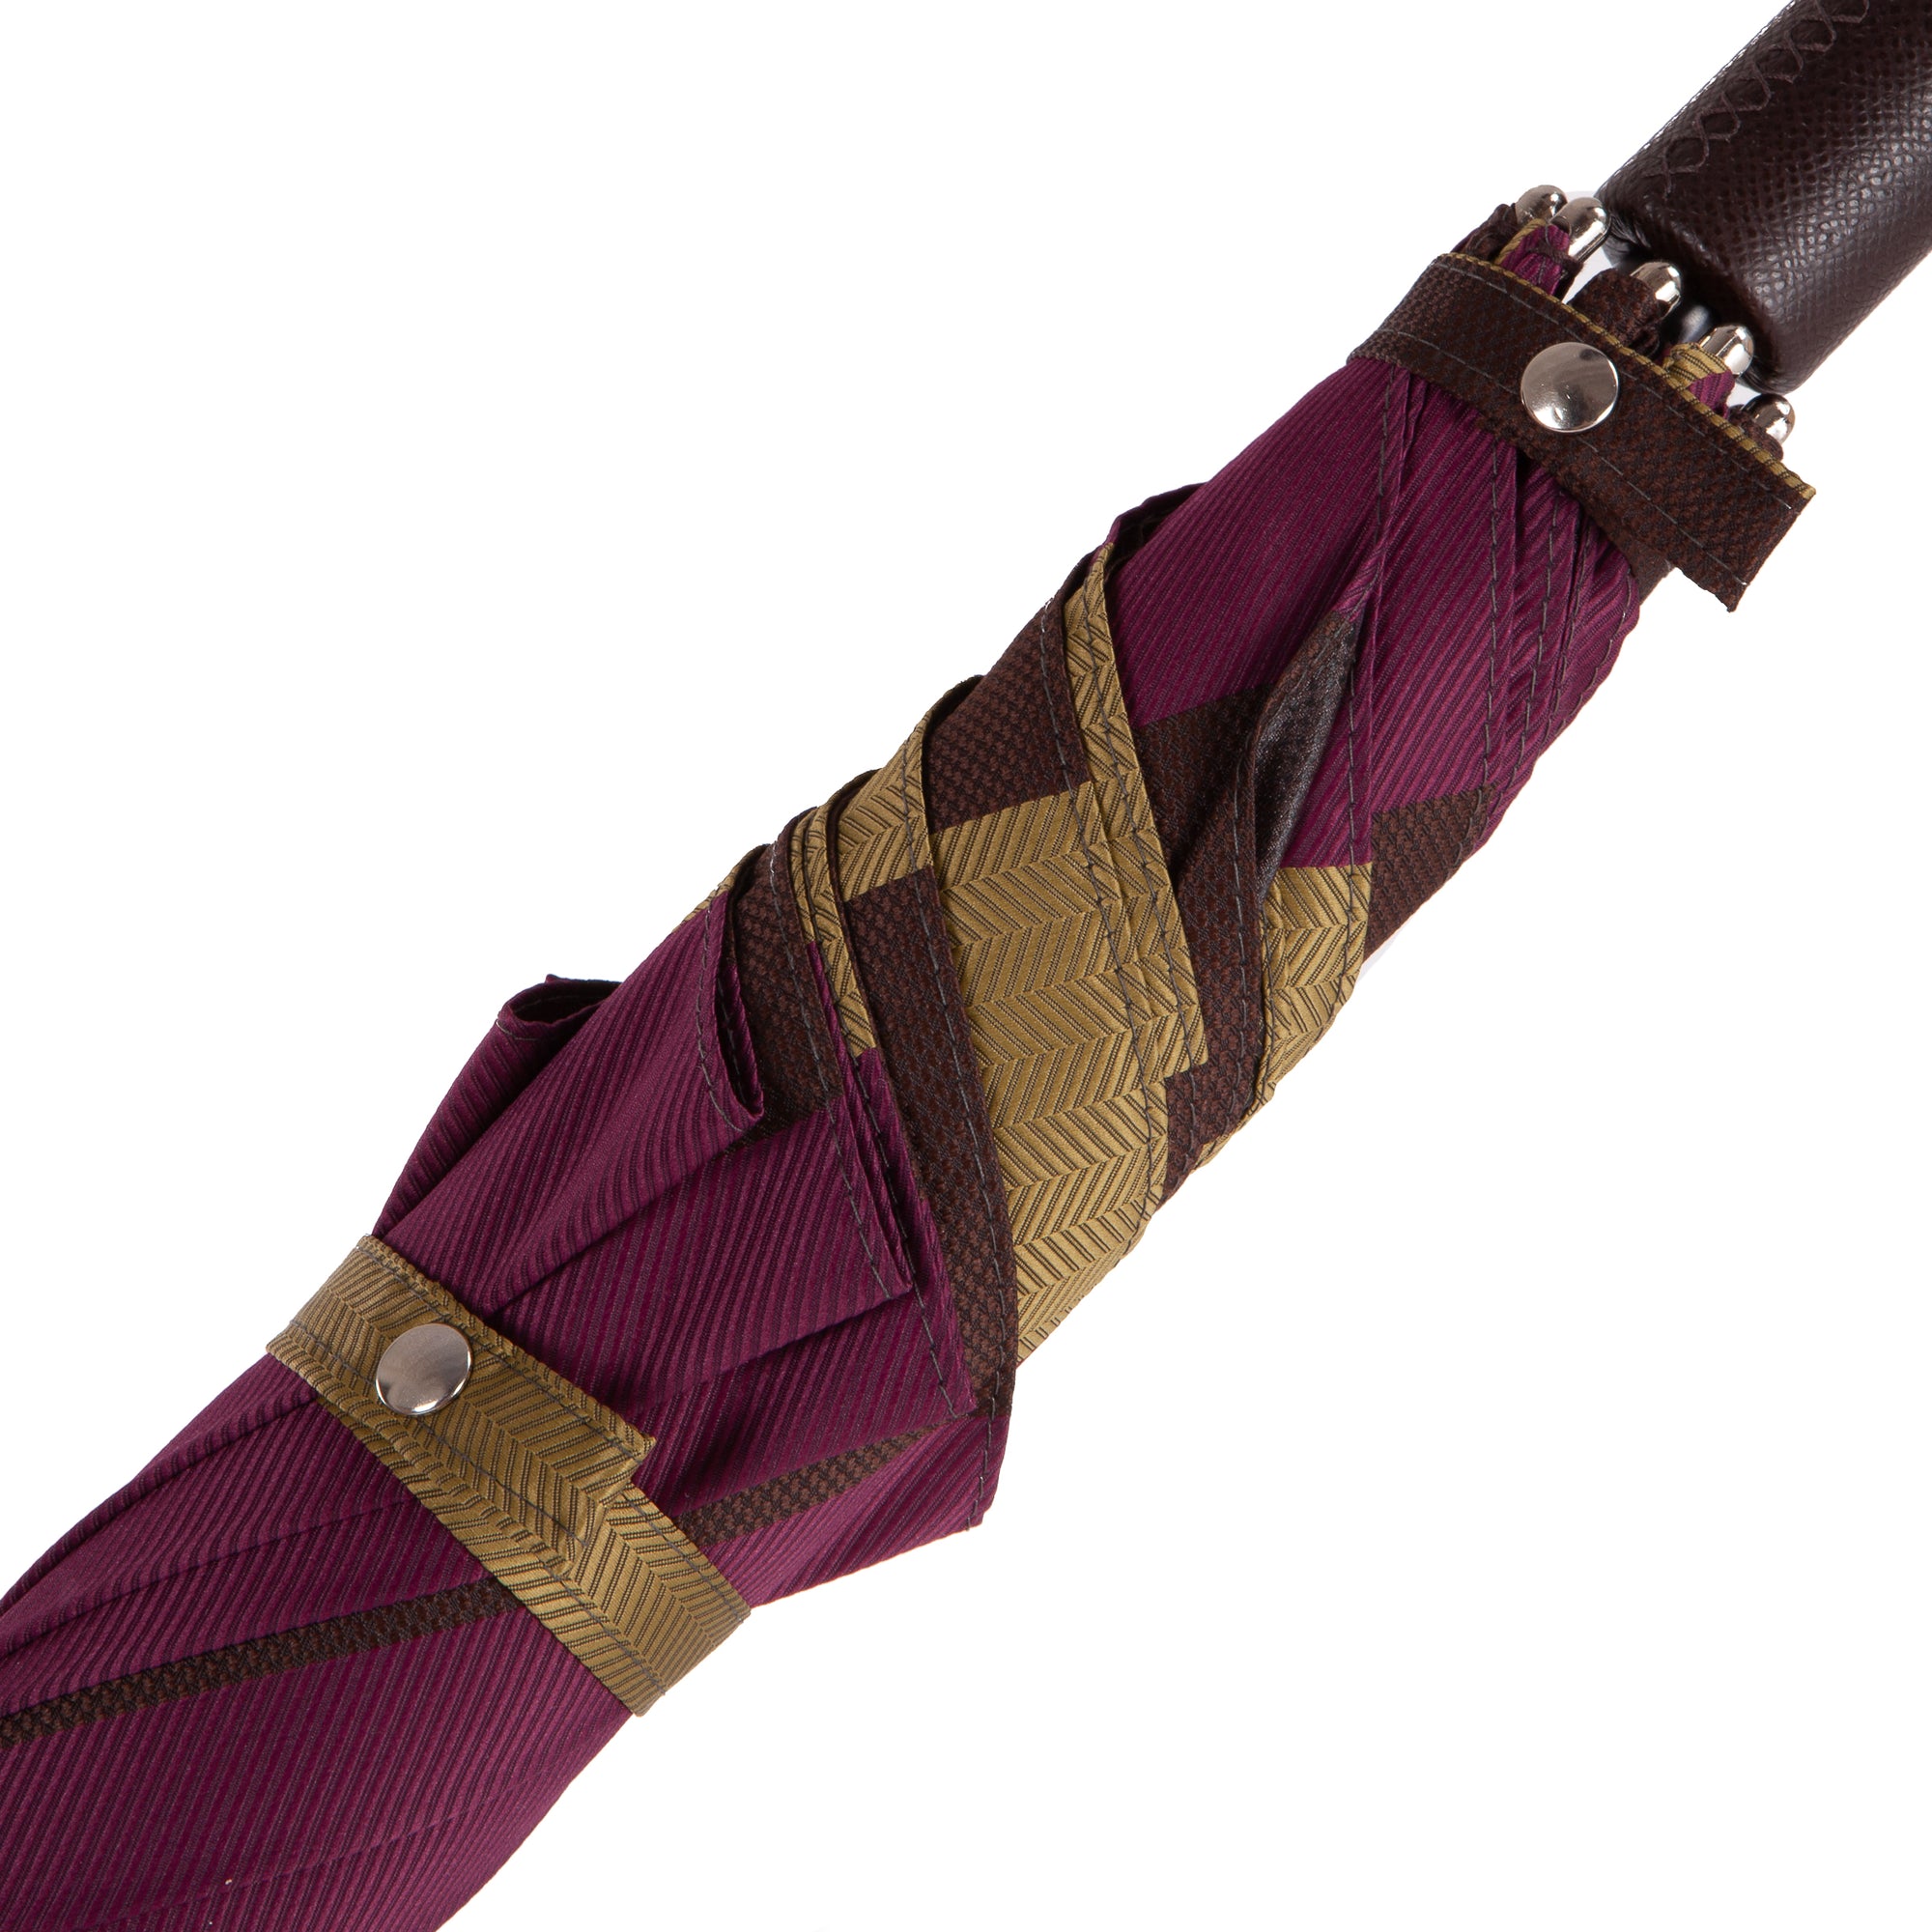 Storm Umbrella with Leather Handle